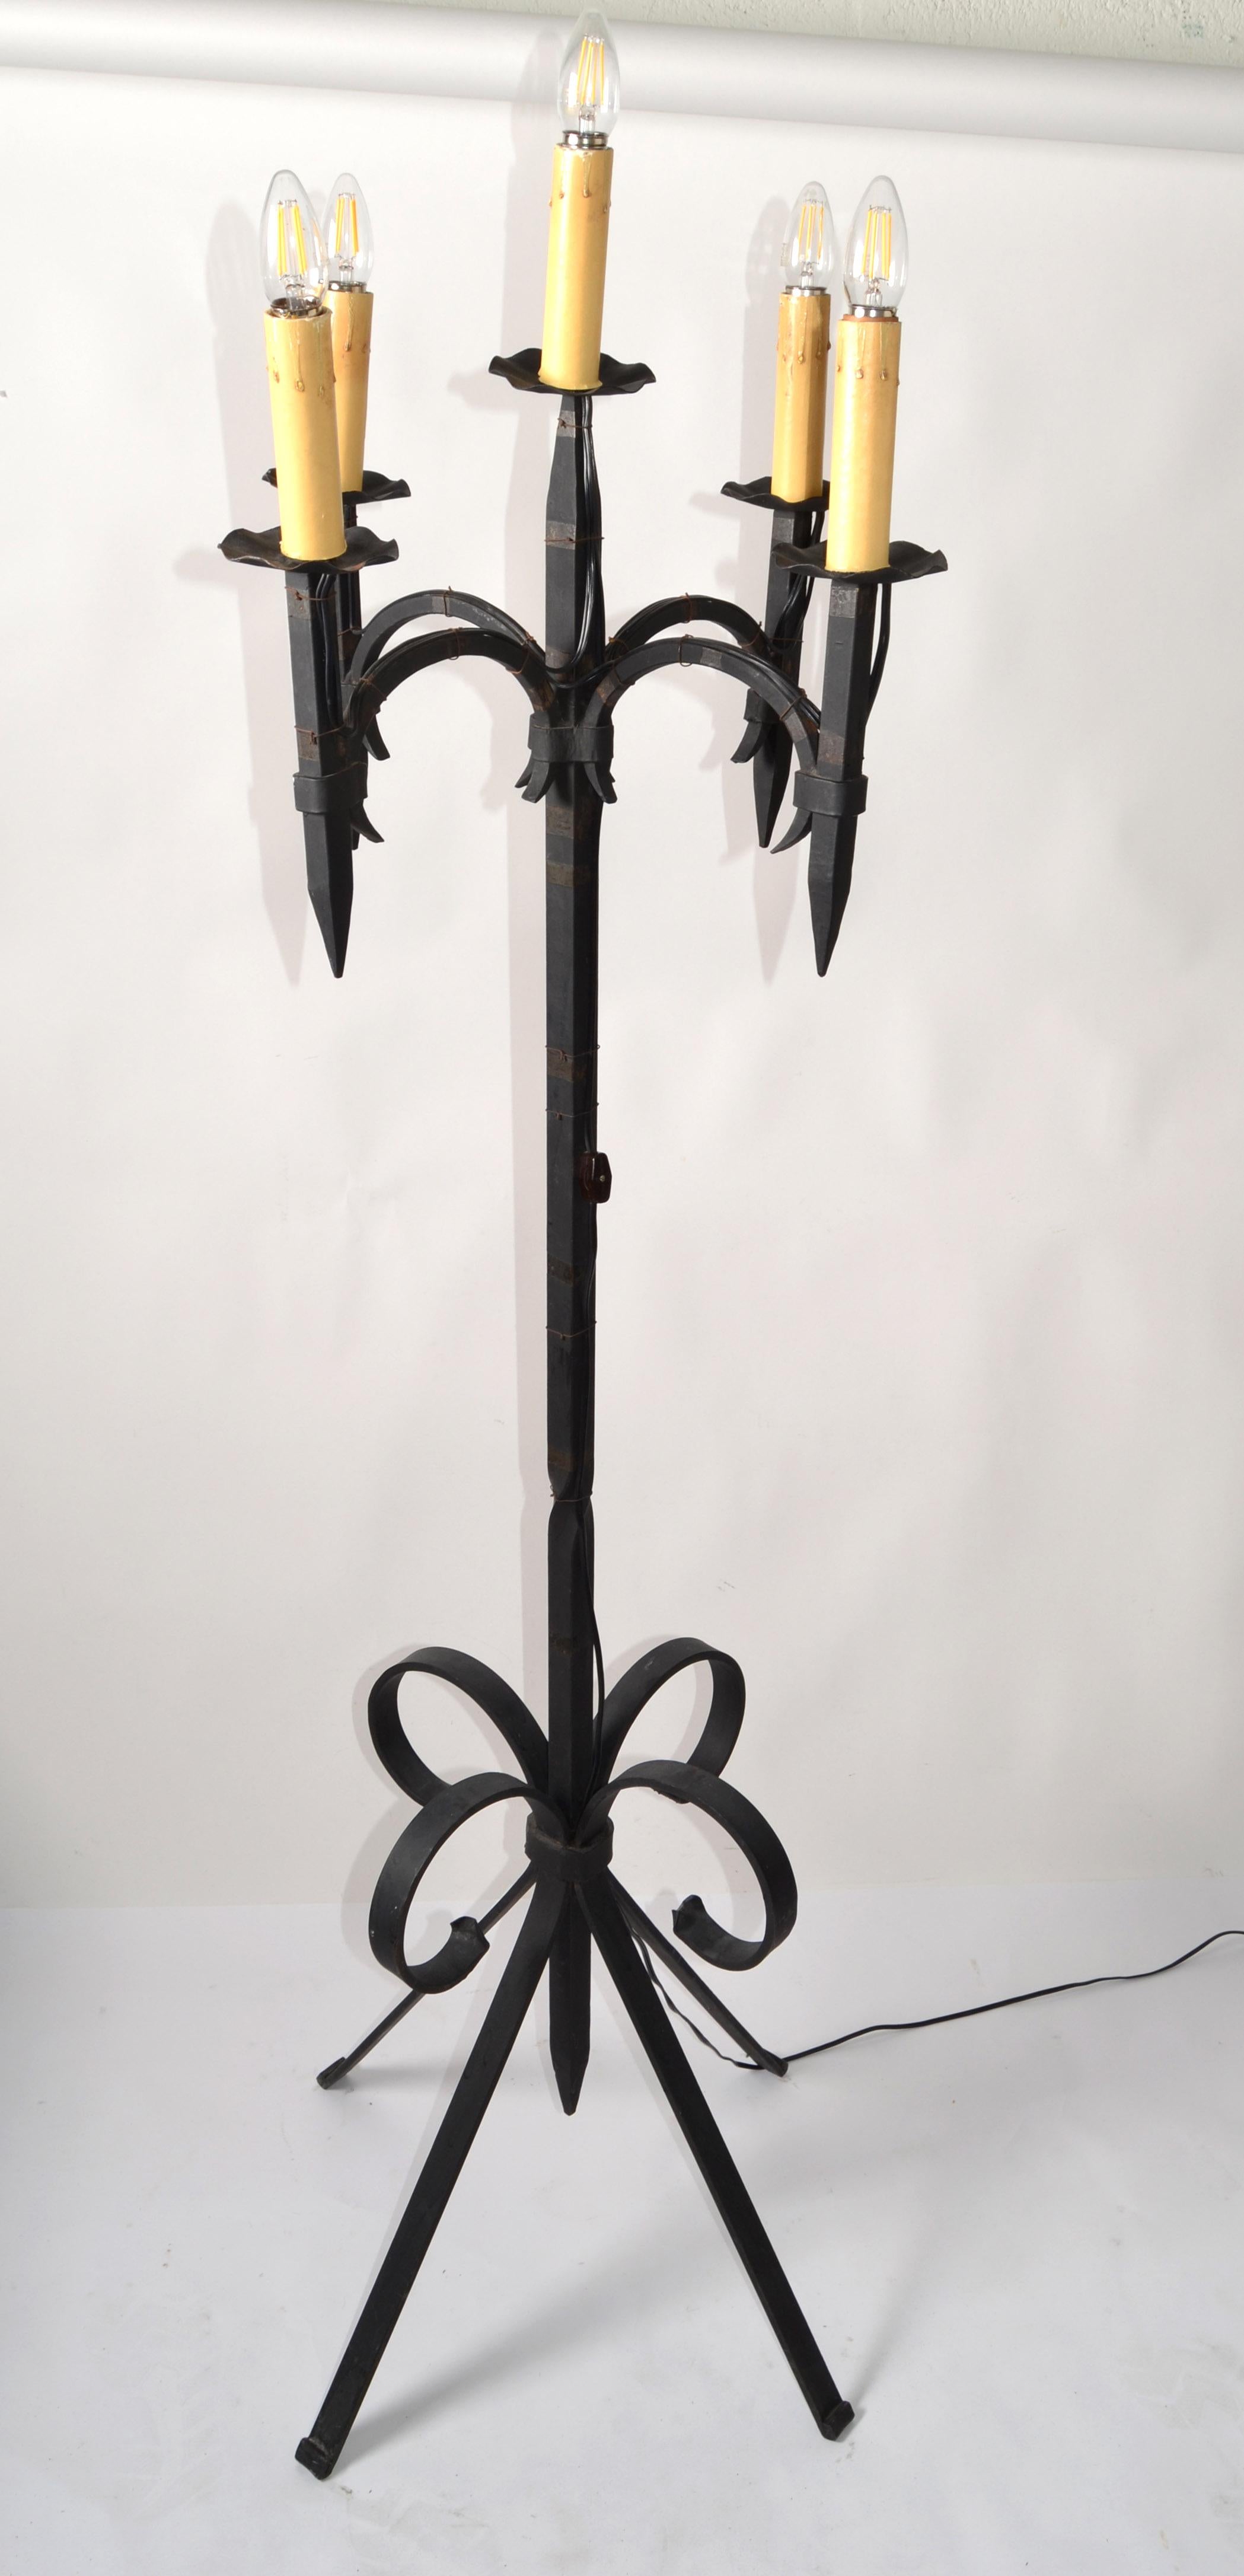 Early 20th century Gothic Style French forged wrought iron 5 light candelabra floor lamp.
US Rewiring and each takes a regular or LED Light bulb.
Has a cord switch attached to the twisted stem. 
Heavy floor lamp built to last for many more